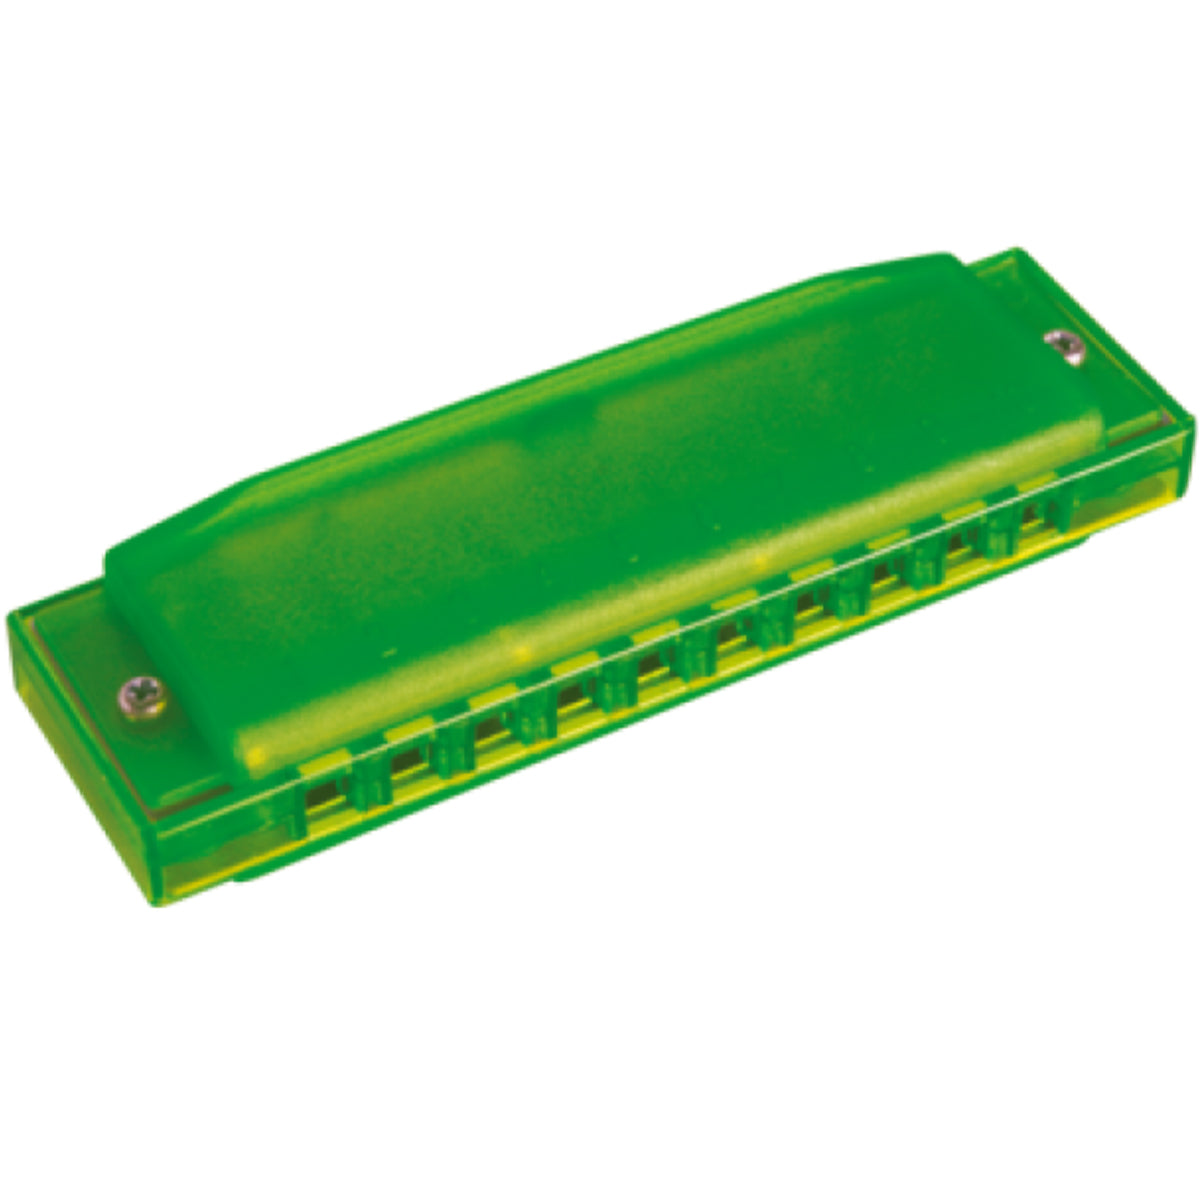 Hohner M91.600 Happy Color Harmonica Green Colour - Key of C